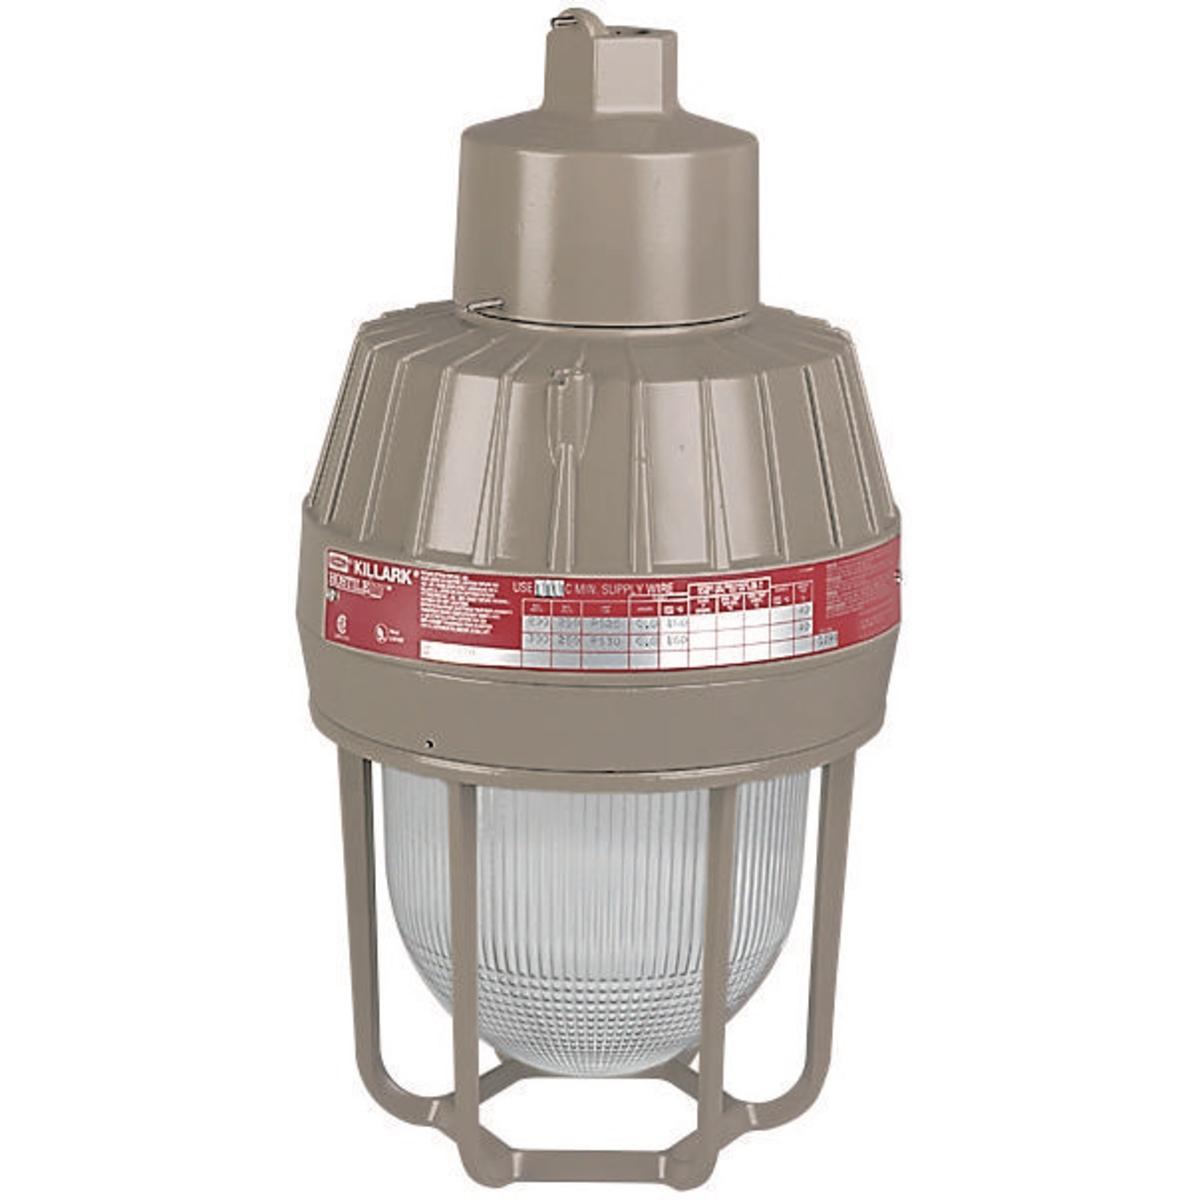 Hubbell EMS151A2 HID 150W Fluorescent 120V HPS 3/4" Pendant  ; Four light sources—Incandescent, compact fluorescent, high pressure sodium and metal halide ; Mounting choice—Pendant, ceiling, 25˚ stanchion or 90˚ wall mount, all with “wireless” design that allows fast, eas